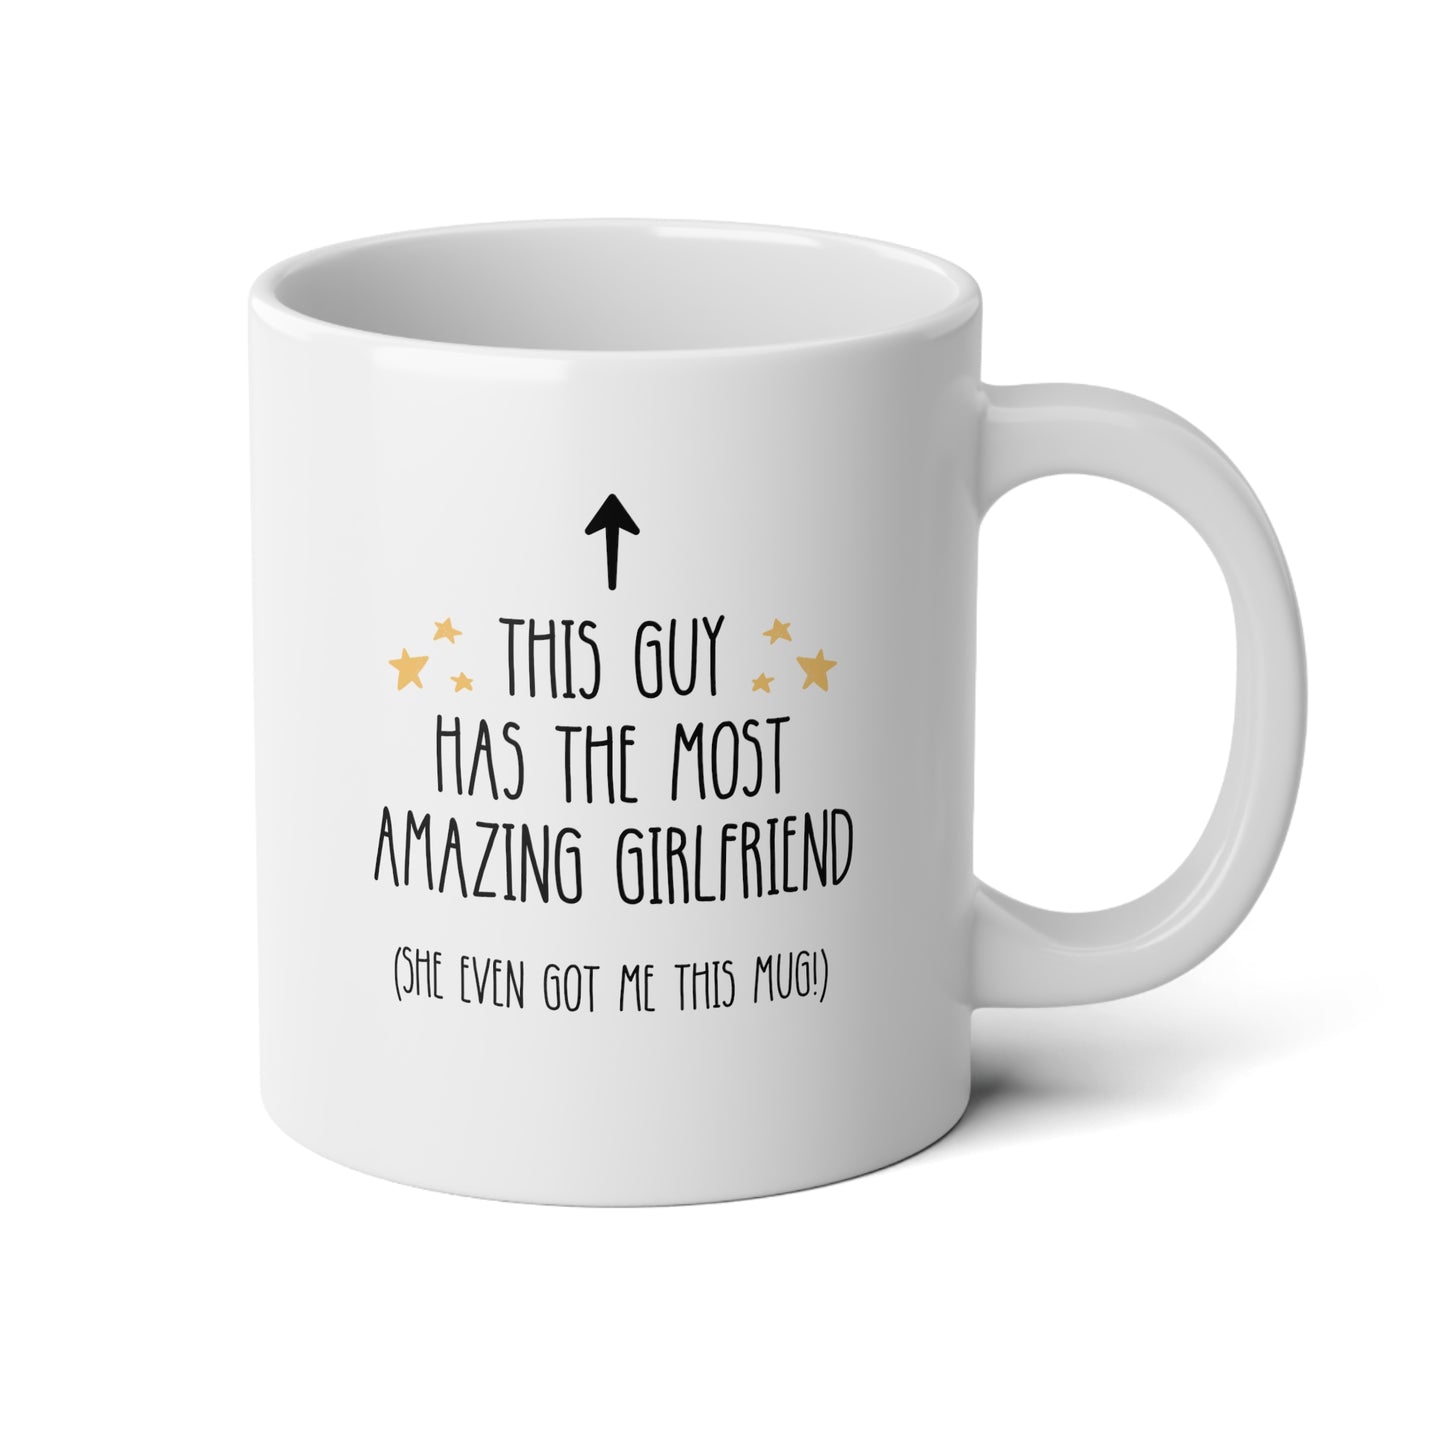 This Guy Has The Most Amazing Girlfriend 20oz white funny large coffee mug gift for boyfriend anniversary valentines him lover waveywares wavey wares wavywares wavy wares